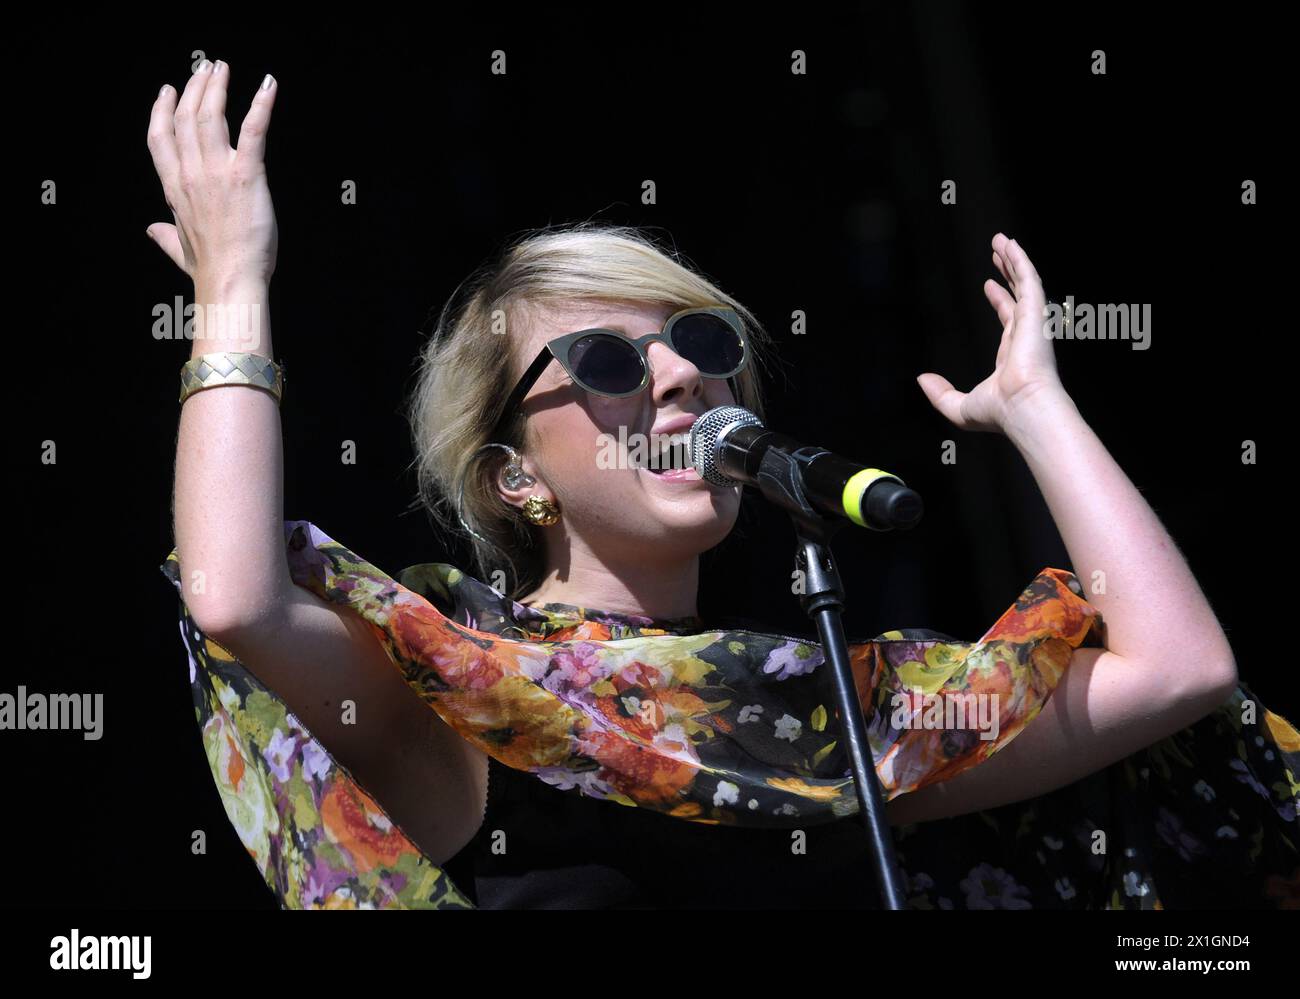 Singer Victoria Christina Hesketh performs during a concert at the music festival 'Frequency 2013' in St. Poelten, Austria, 17 August 2013. The festival takes place from 15 to 17 August. - 20130817 PD0959 - Rechteinfo: Rights Managed (RM) Stock Photo